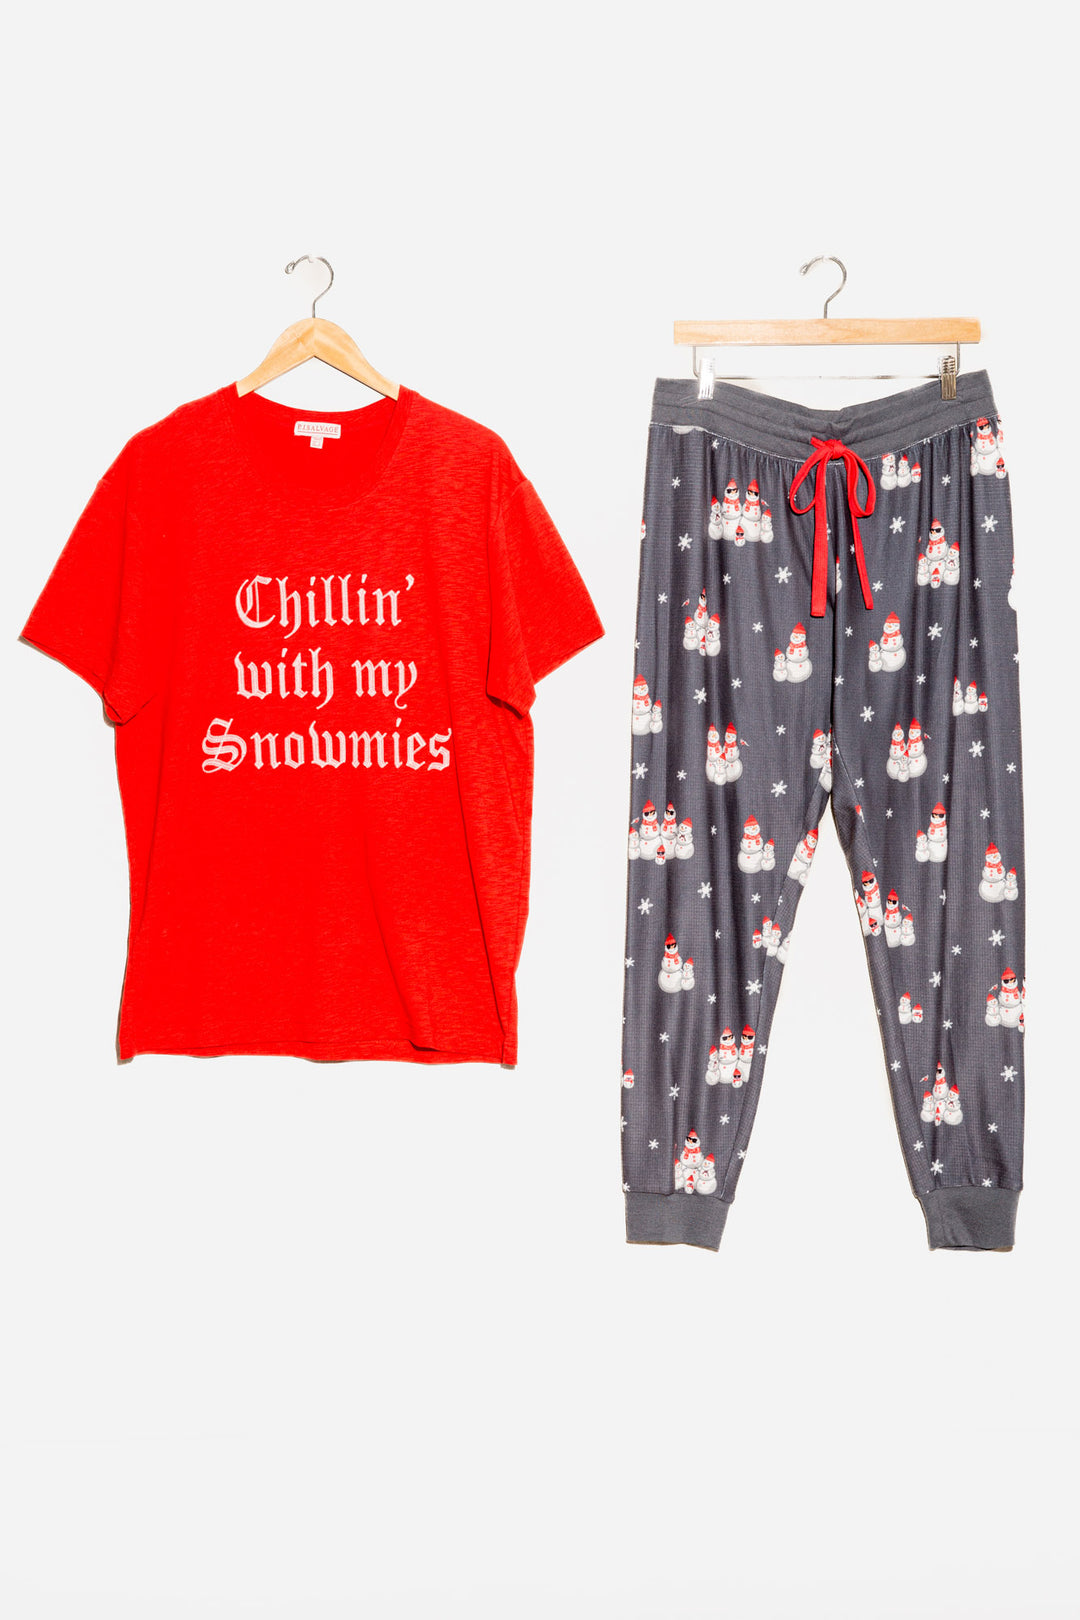 Men's pajama set. Grey thermal velour pant in snowman print & red t-shirt w/'Chillin with my Snowmies' (7257679954020)